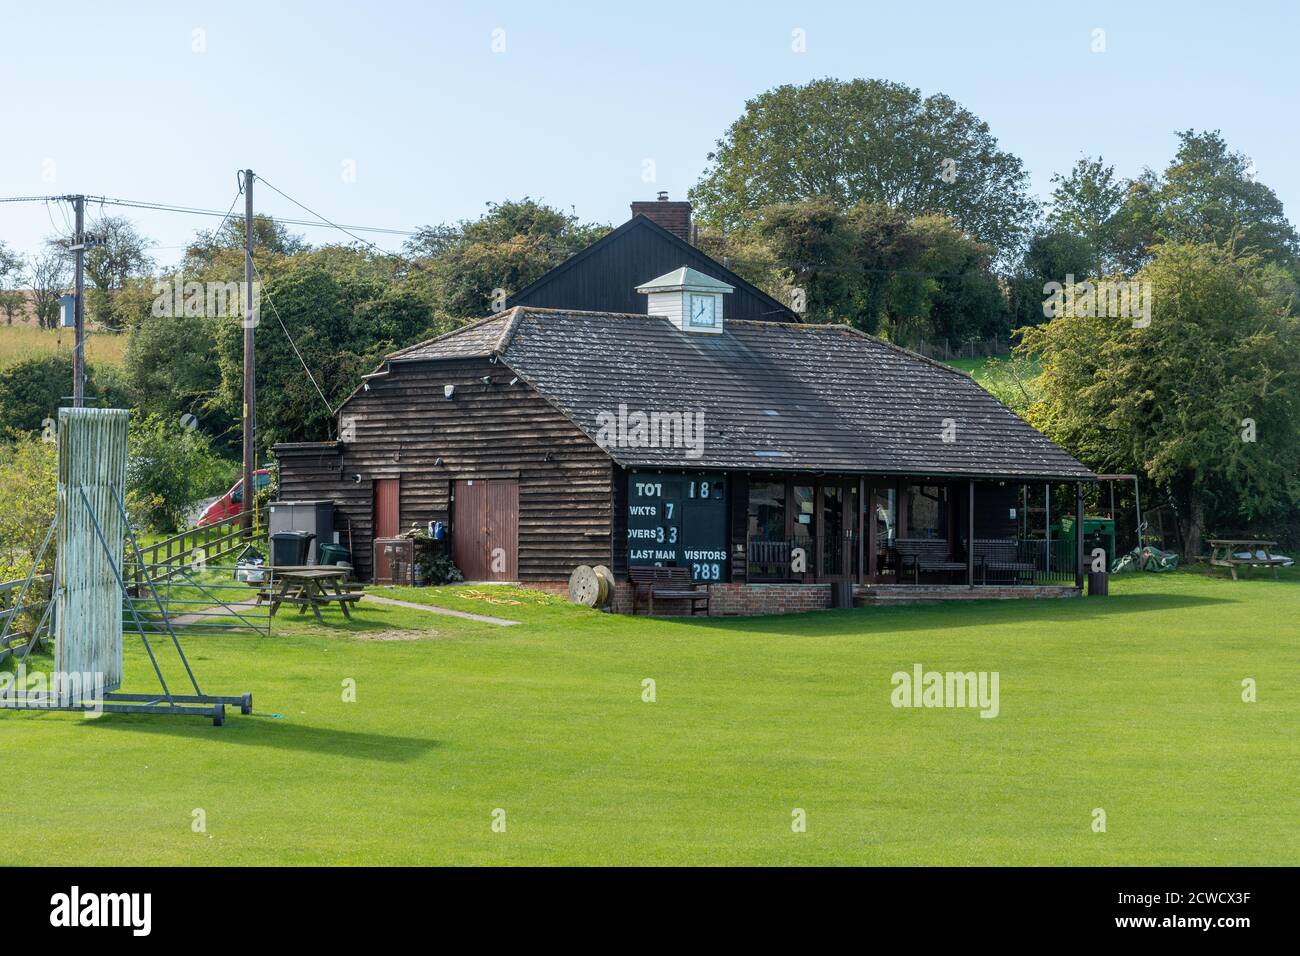 Cricket pavilion and pitch in the village of West Ilsley, Berkshire, UK Stock Photo